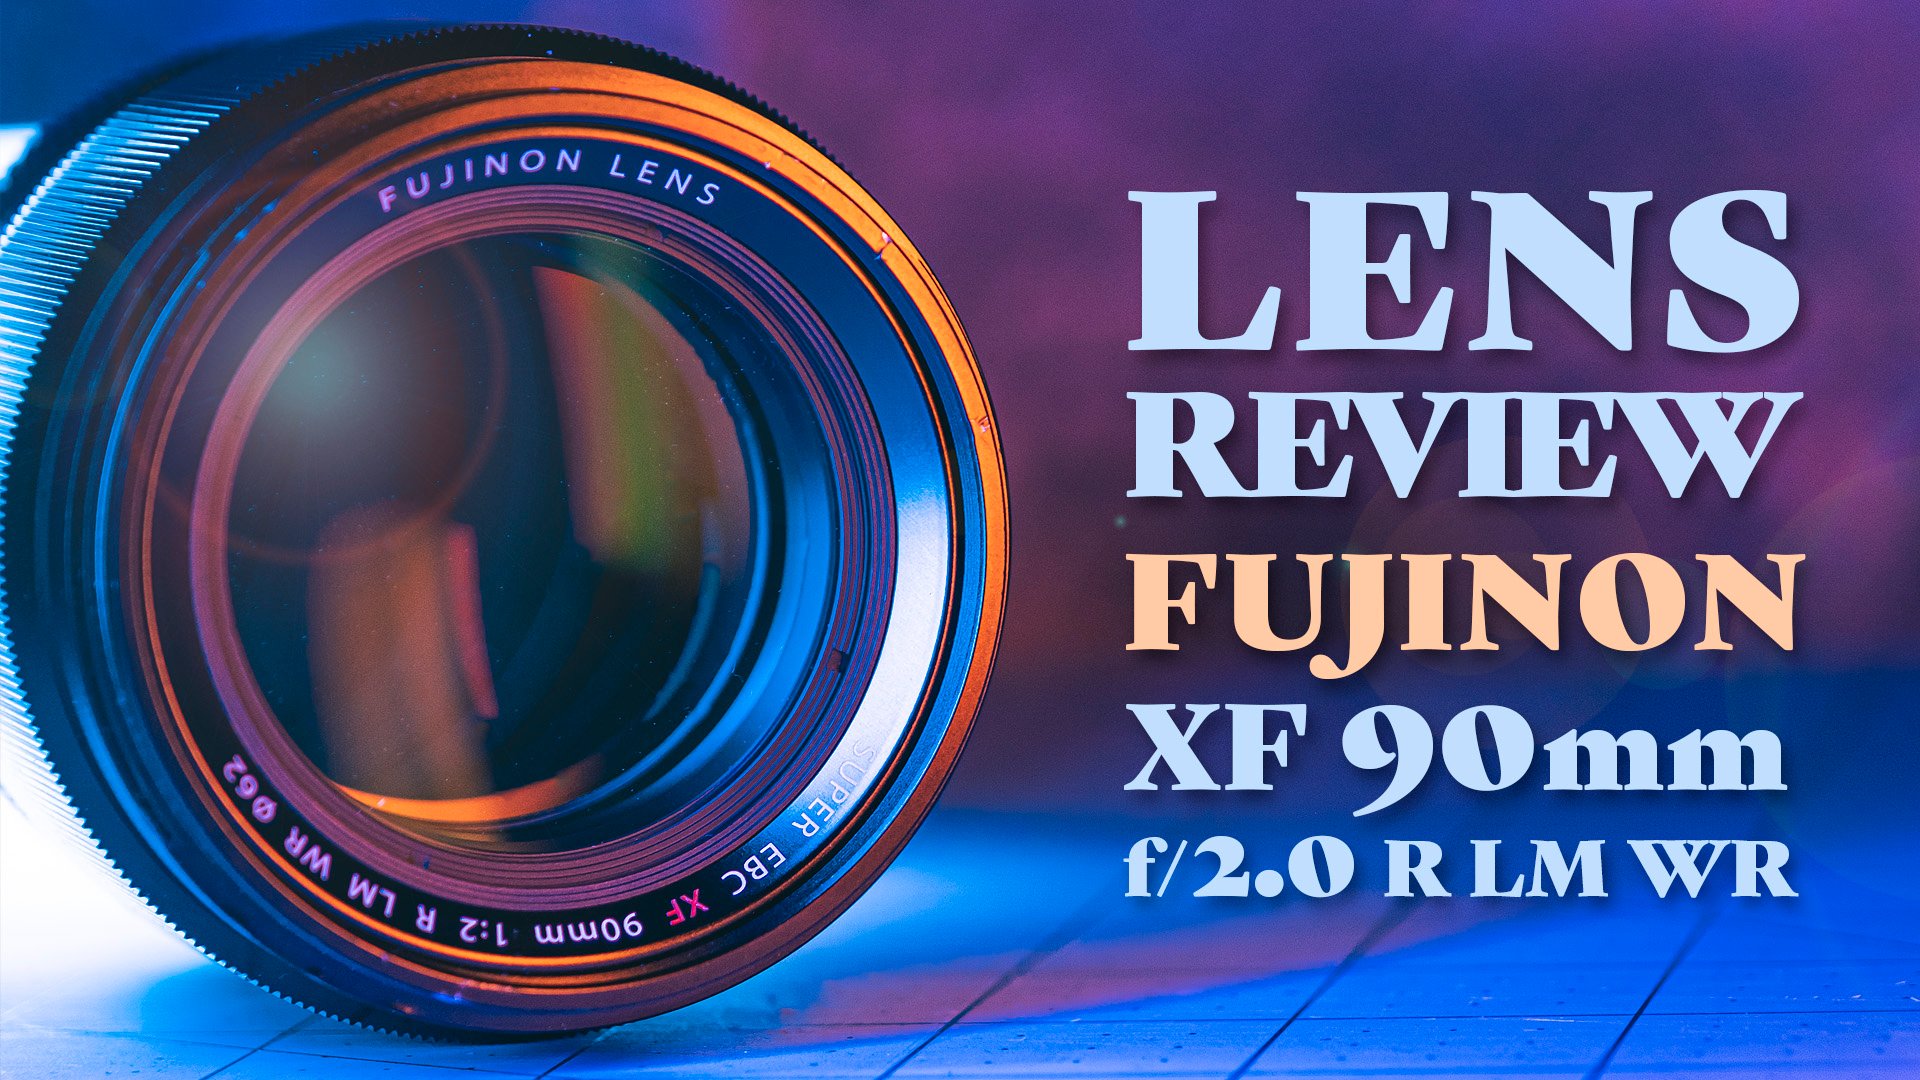 A Review of the Fujifilm XF 90mm f/2.0 R LM WR Lens | PetaPixel